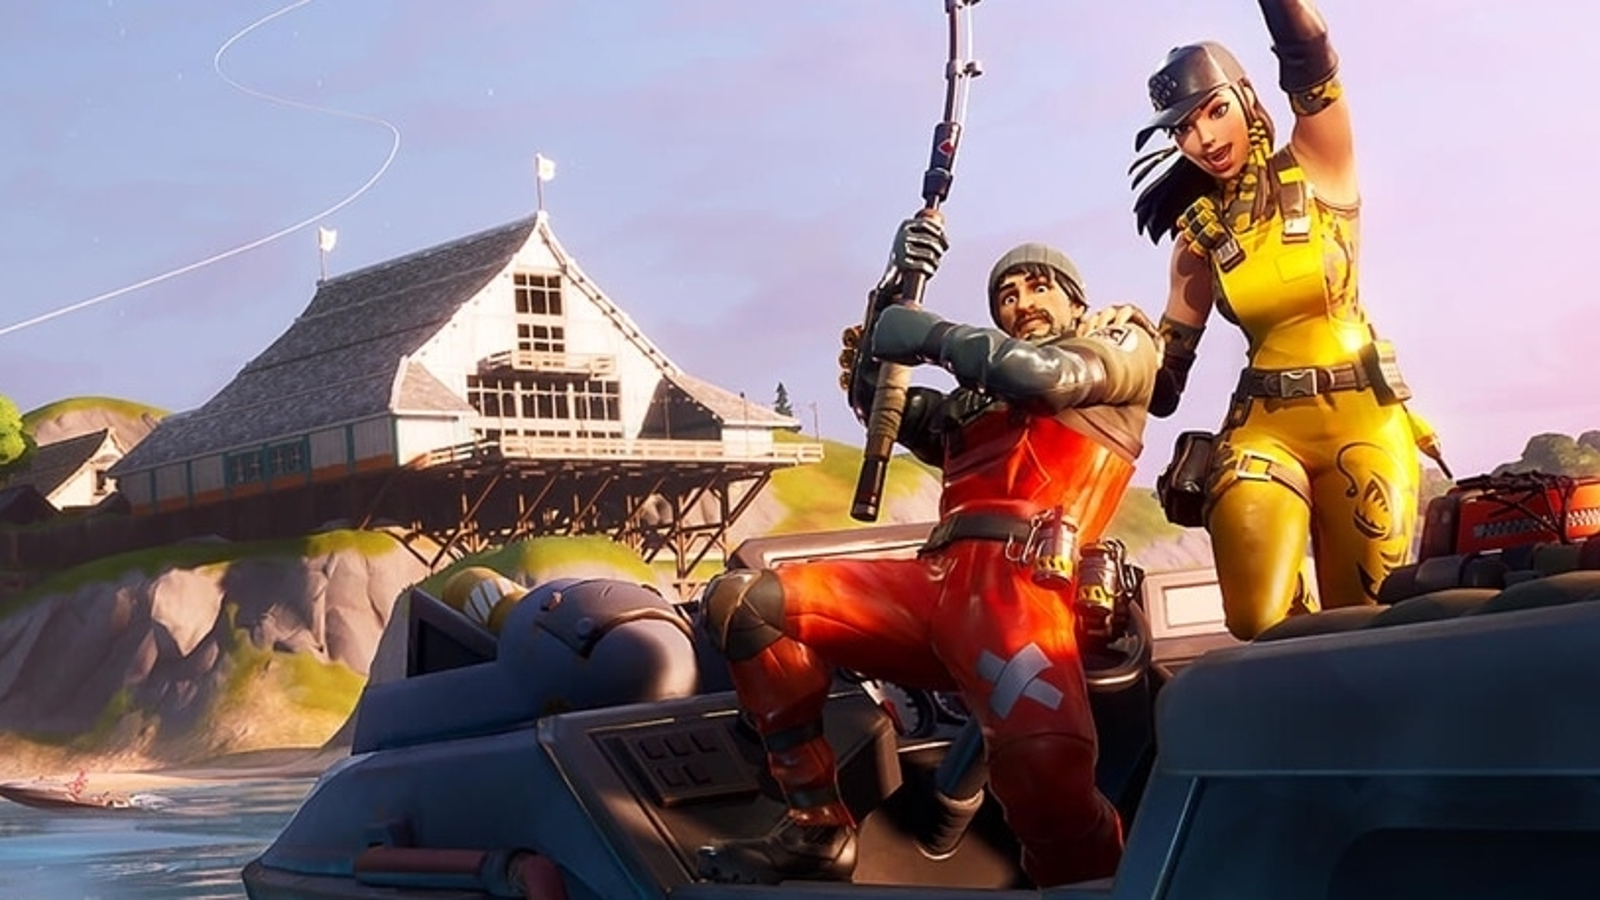 Fortnite's holding a fishing tournament this weekend